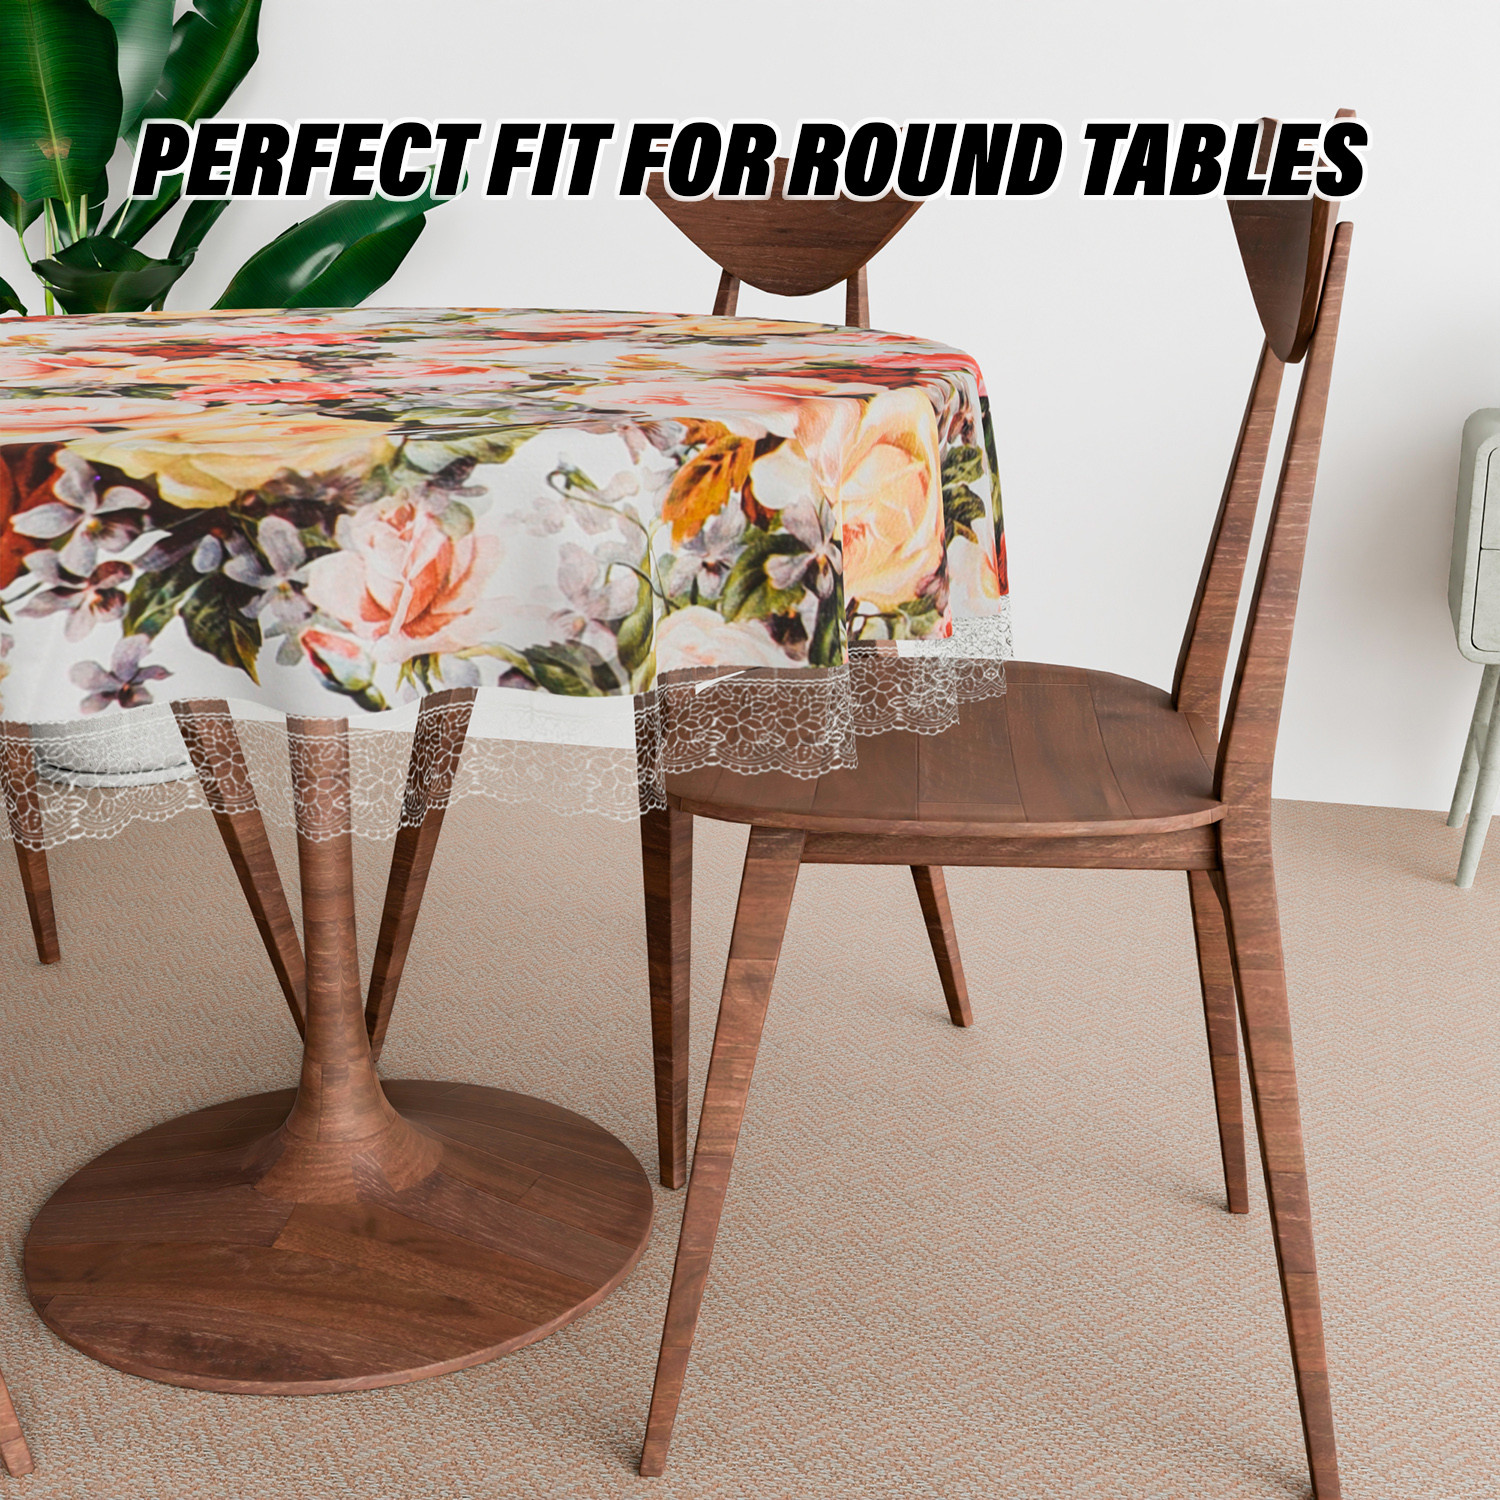 Kuber Industries Round Table Cover | PVC Table Cloth for Round Tables | 4 Seater Round Table Cloth | Rose Kitchen Dining Tablecloth | Tabletop Cover | 60 Inch | White